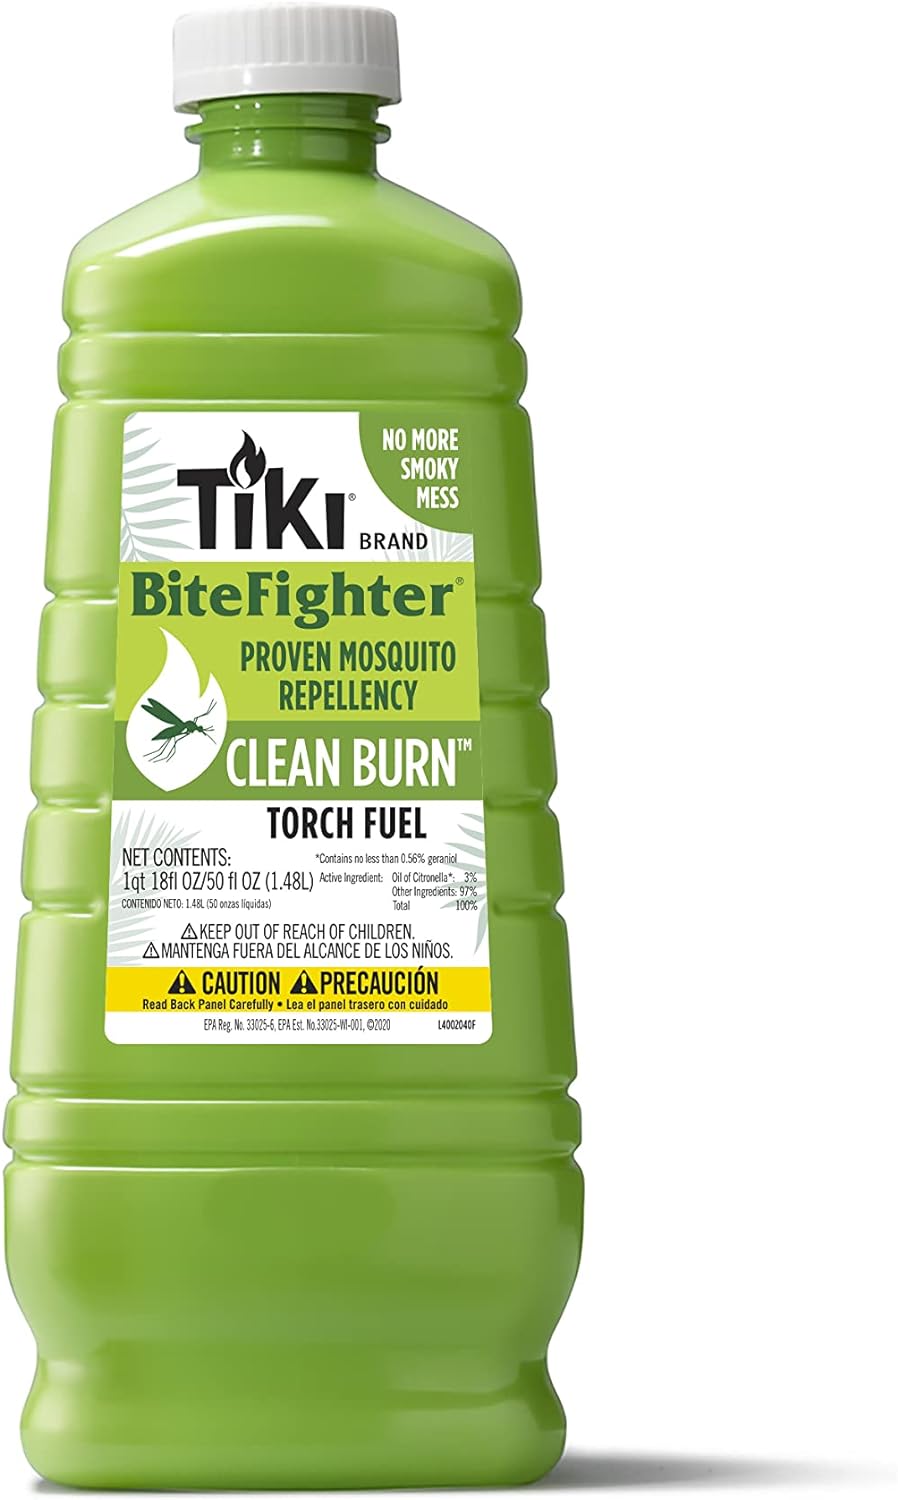 TIKI Brand Clean Burn BiteFighter Mosquito Repellent TIKI Torch Fuel for Outdoors - 50 oz, 1221119